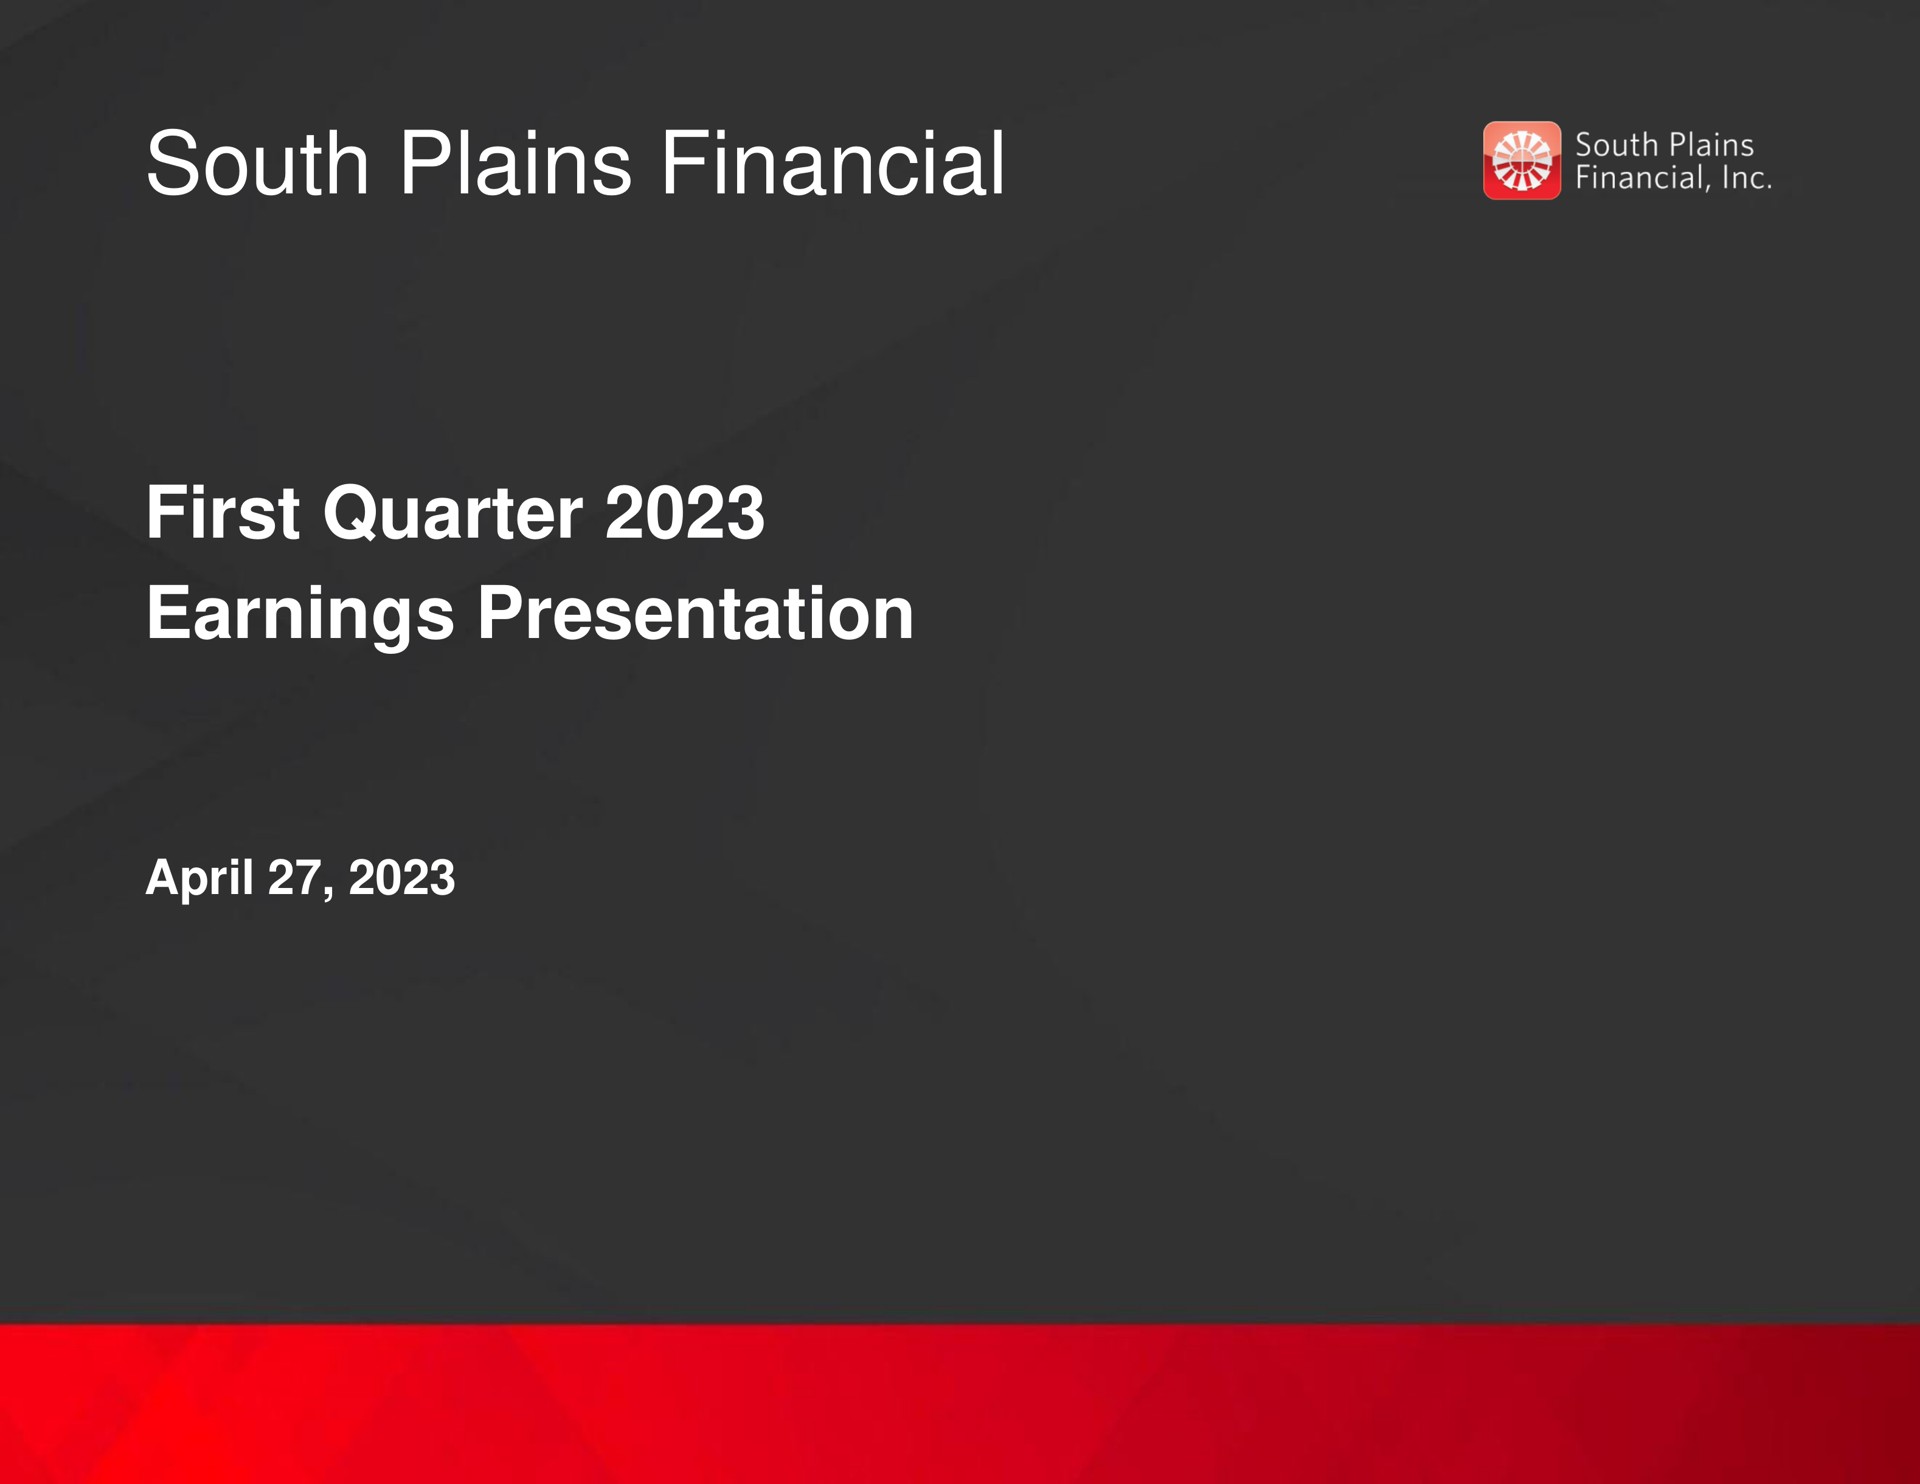 south plains financial first quarter earnings presentation | South Plains Financial